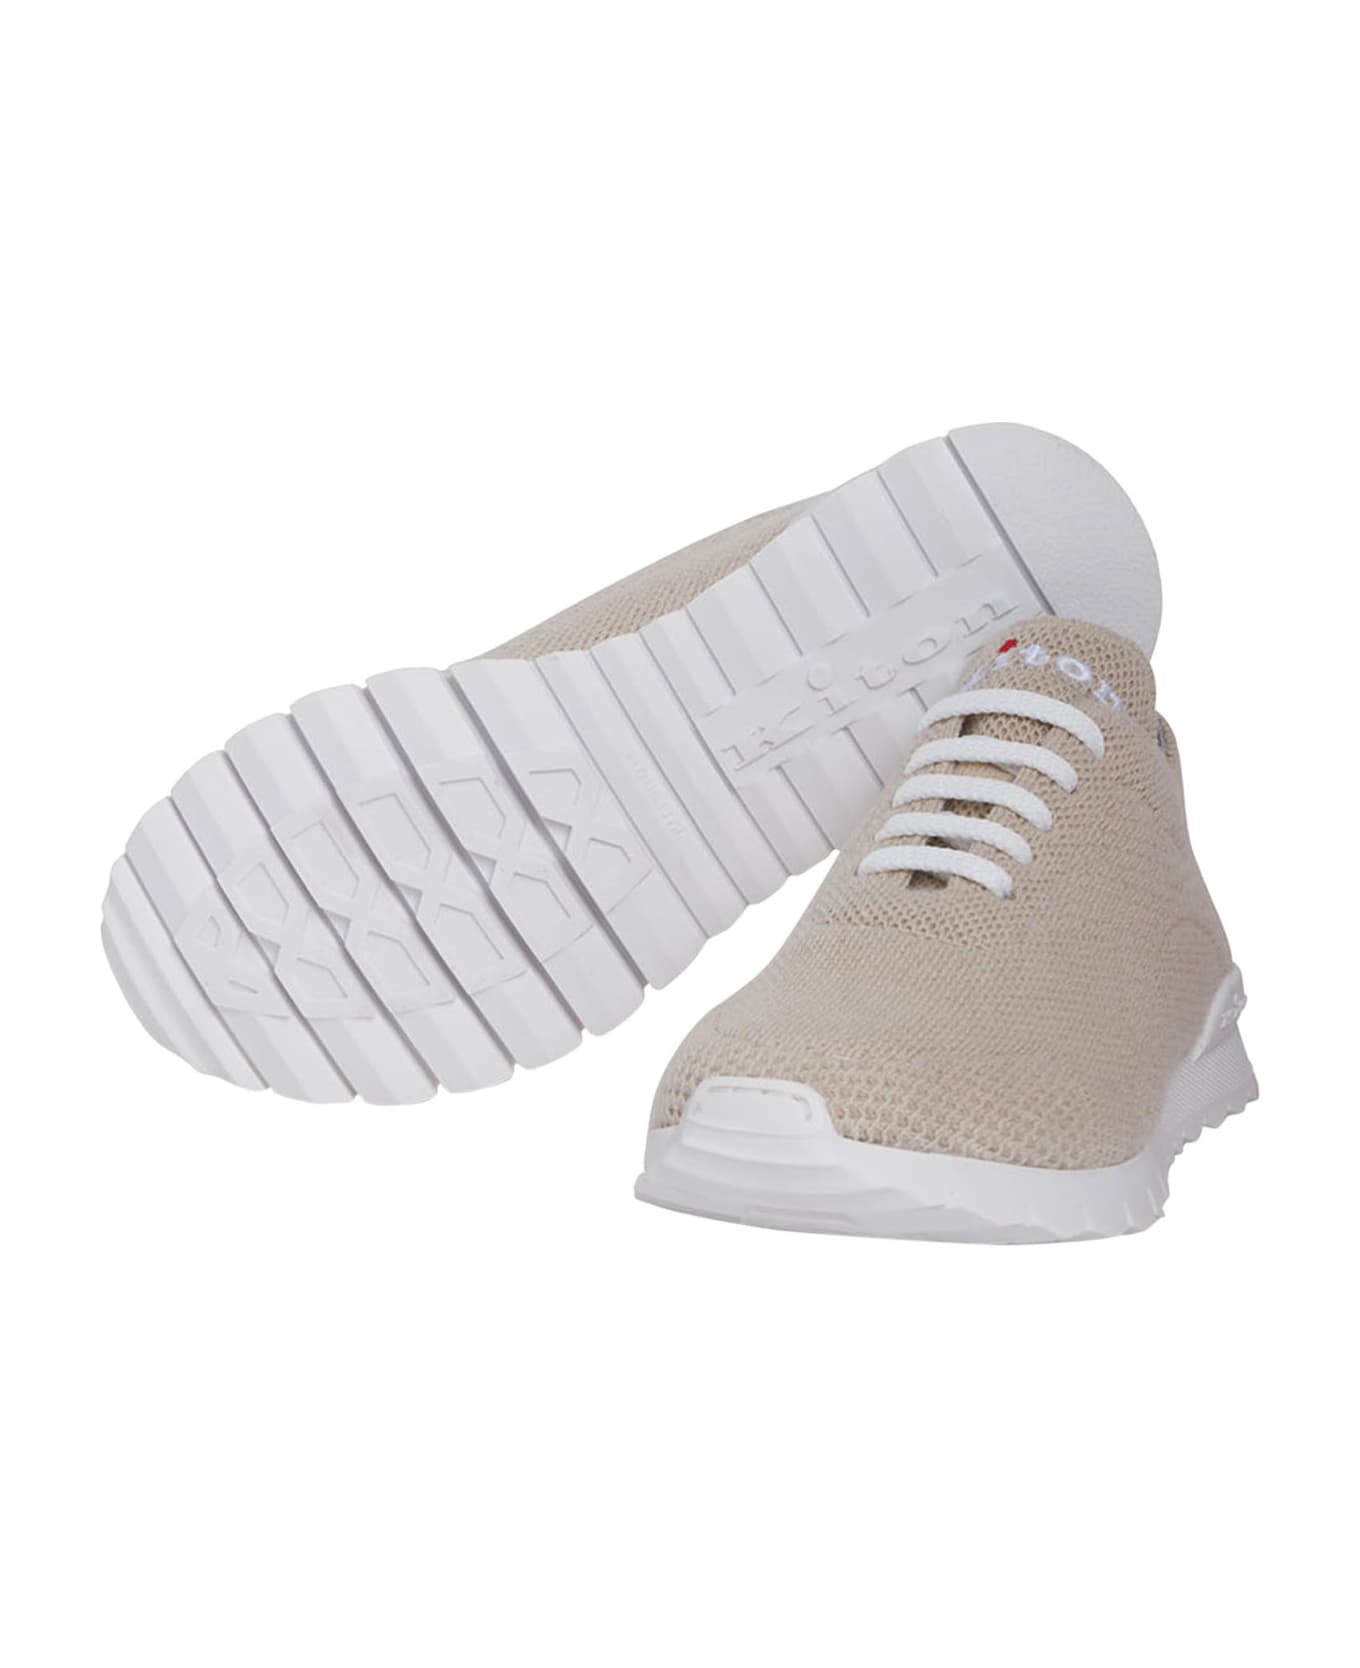 Kiton Fits - Sneakers Shoes Cashmere - BEIGE スニーカー